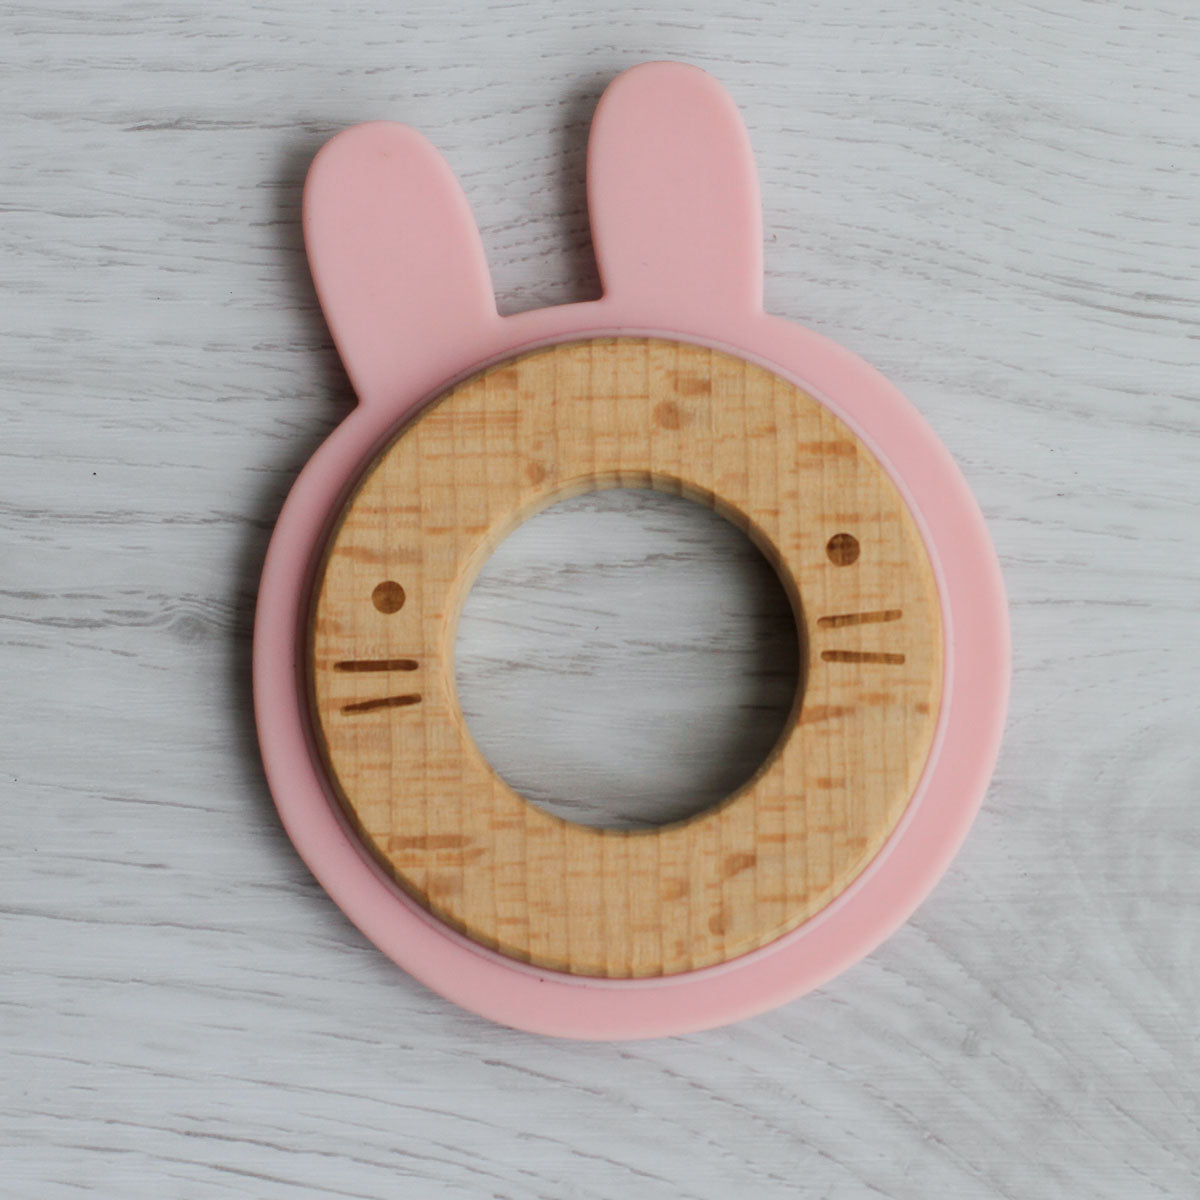 Wood + Silicone Disc Teether Toy - Pink